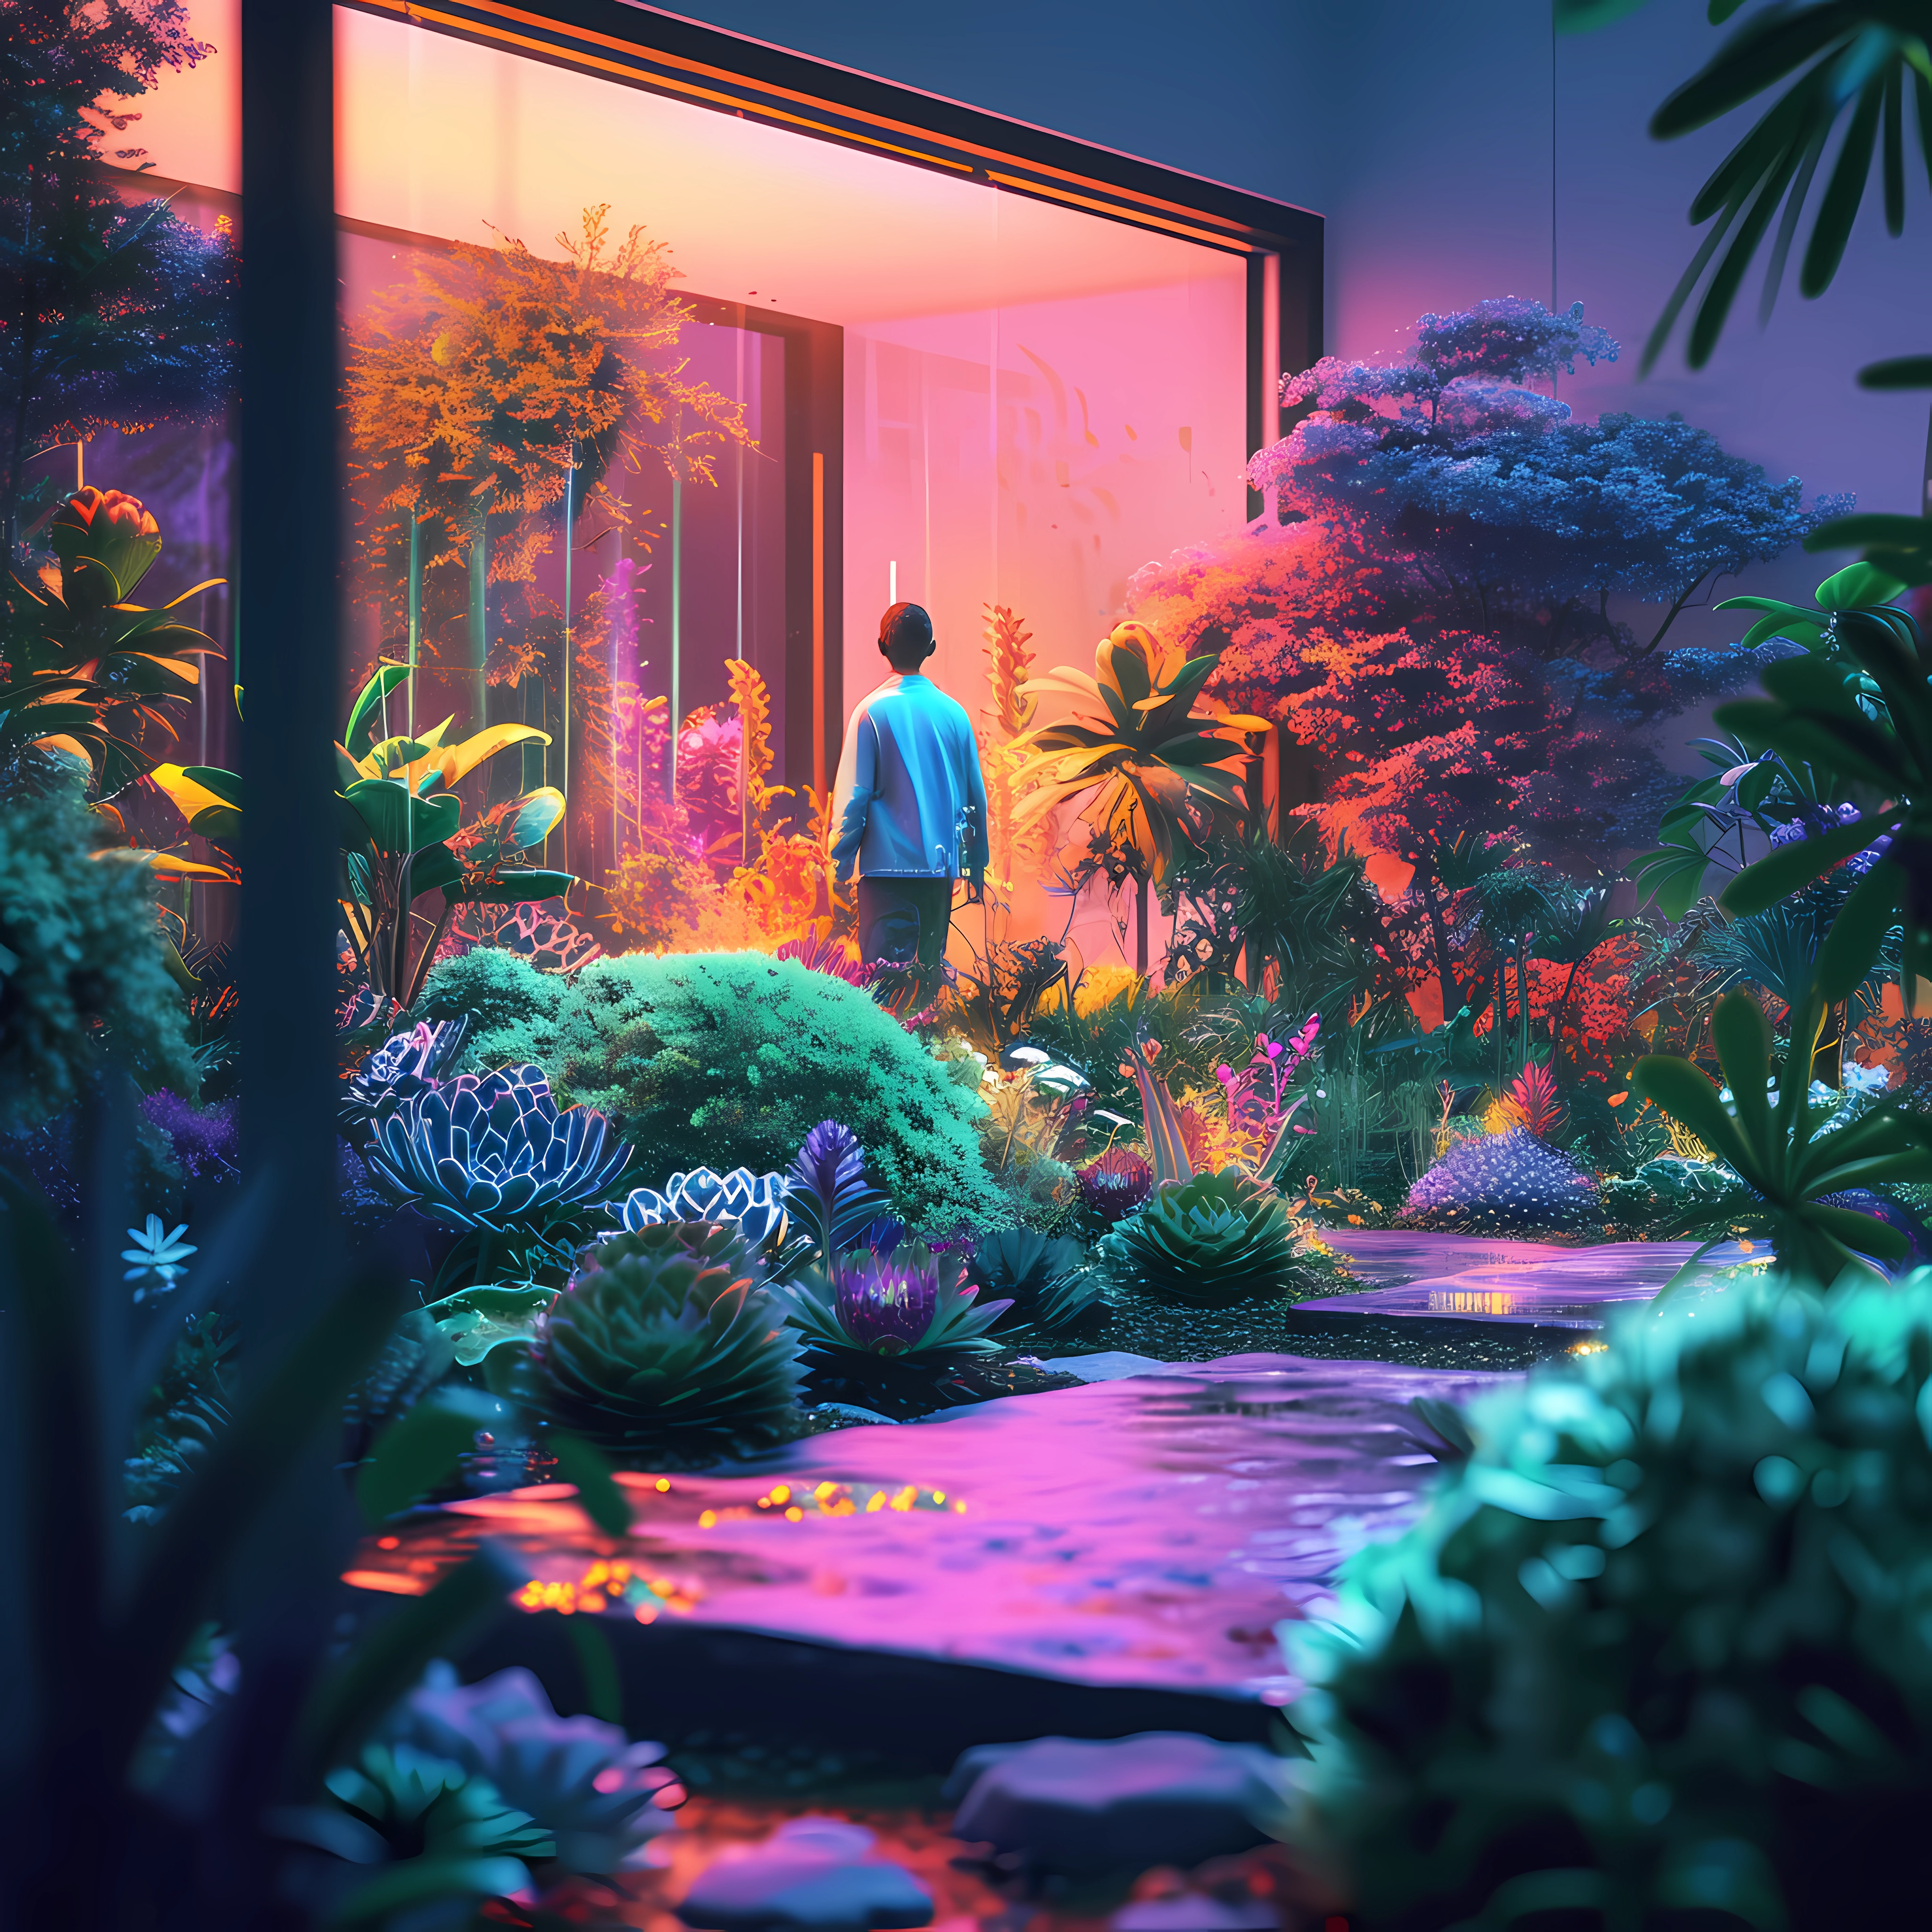 Avatar image featuring a person standing in a vibrant, psychedelic garden with vaporwave aesthetics, surrounded by lush plants illuminated by neon lights.